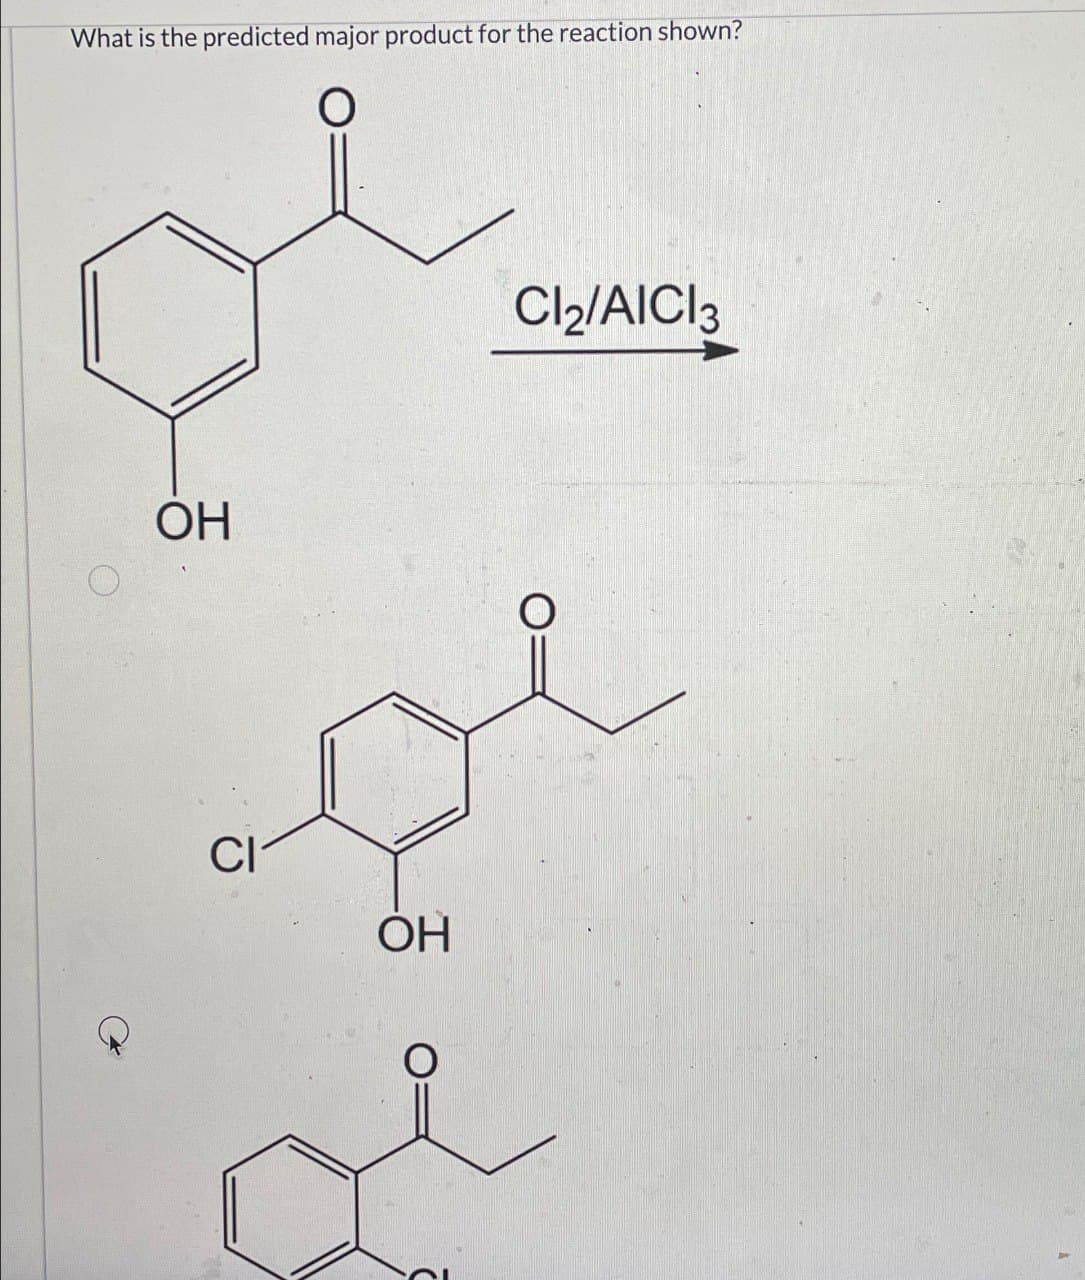 What is the predicted major product for the reaction shown?
OH
CI
OH
Cl2/AICI 3